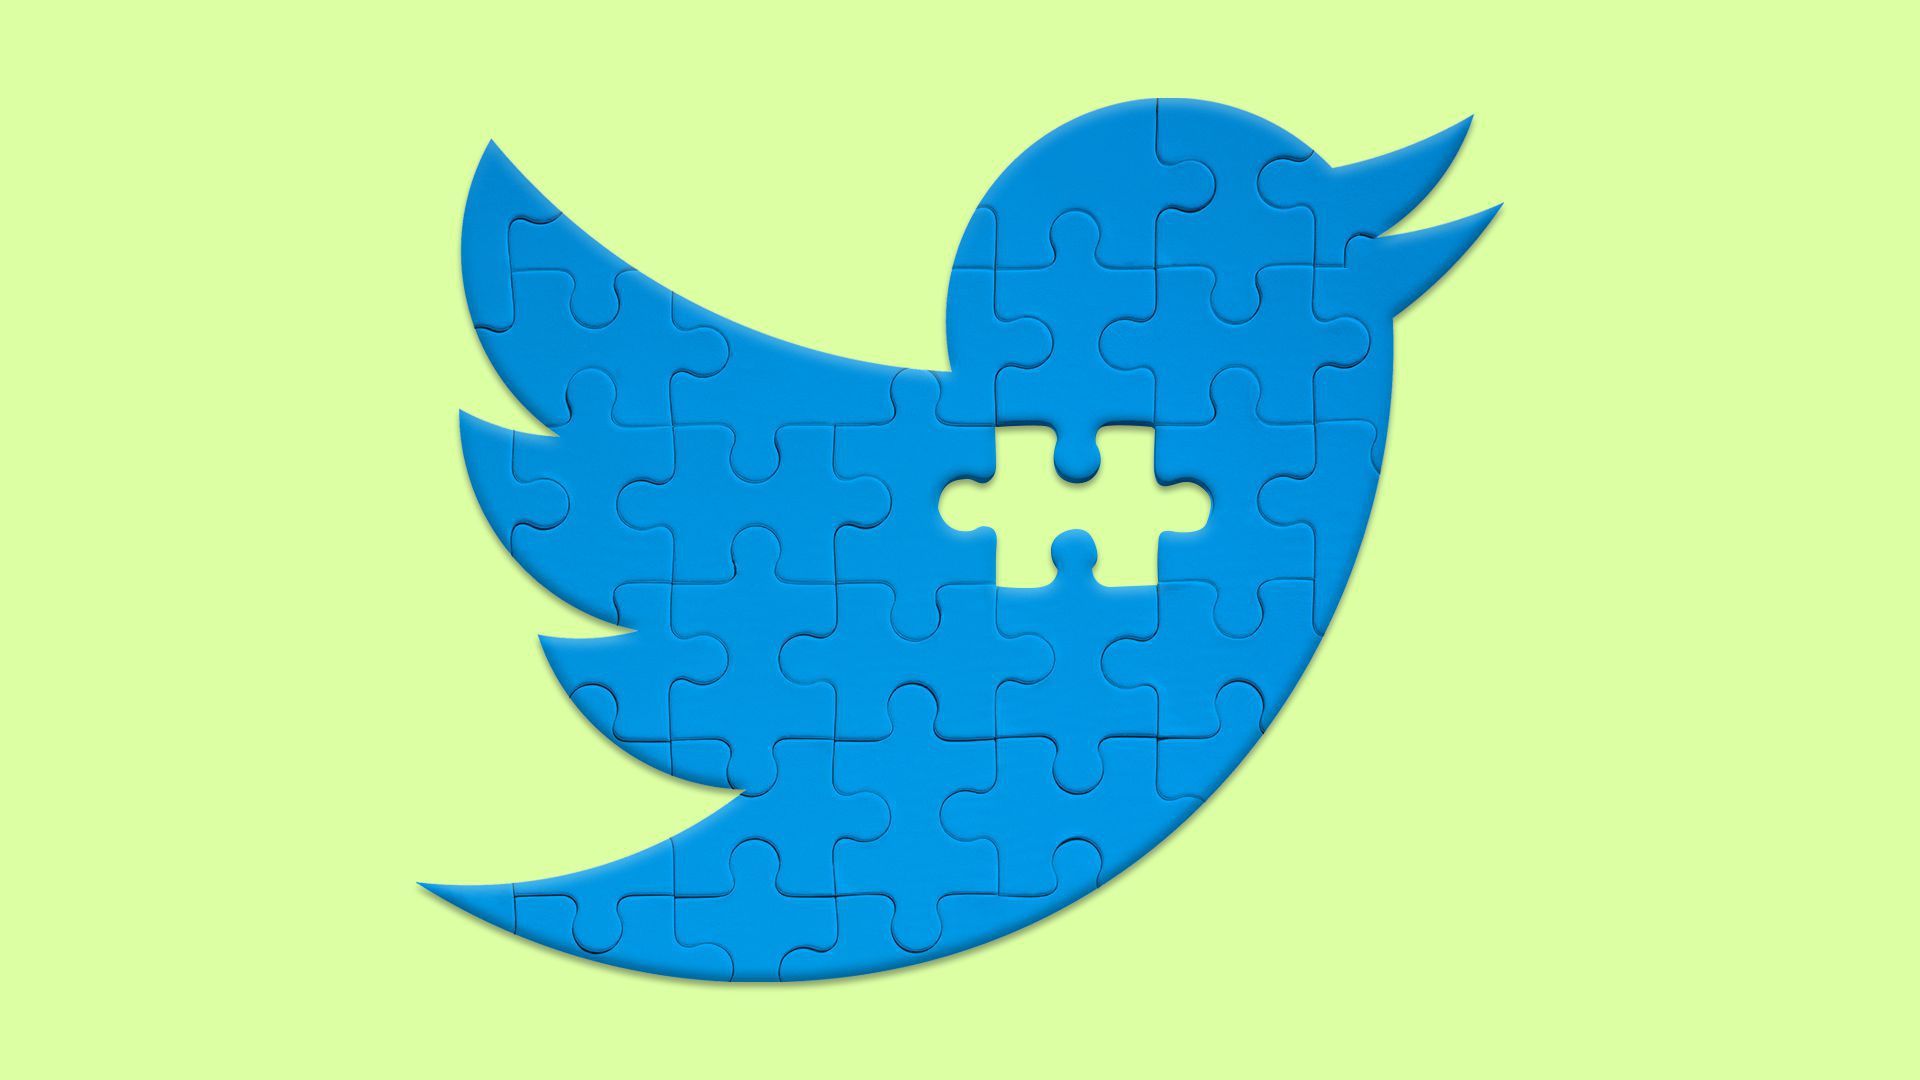 An illustration of Twitter's logo as a puzzle with a piece missing.